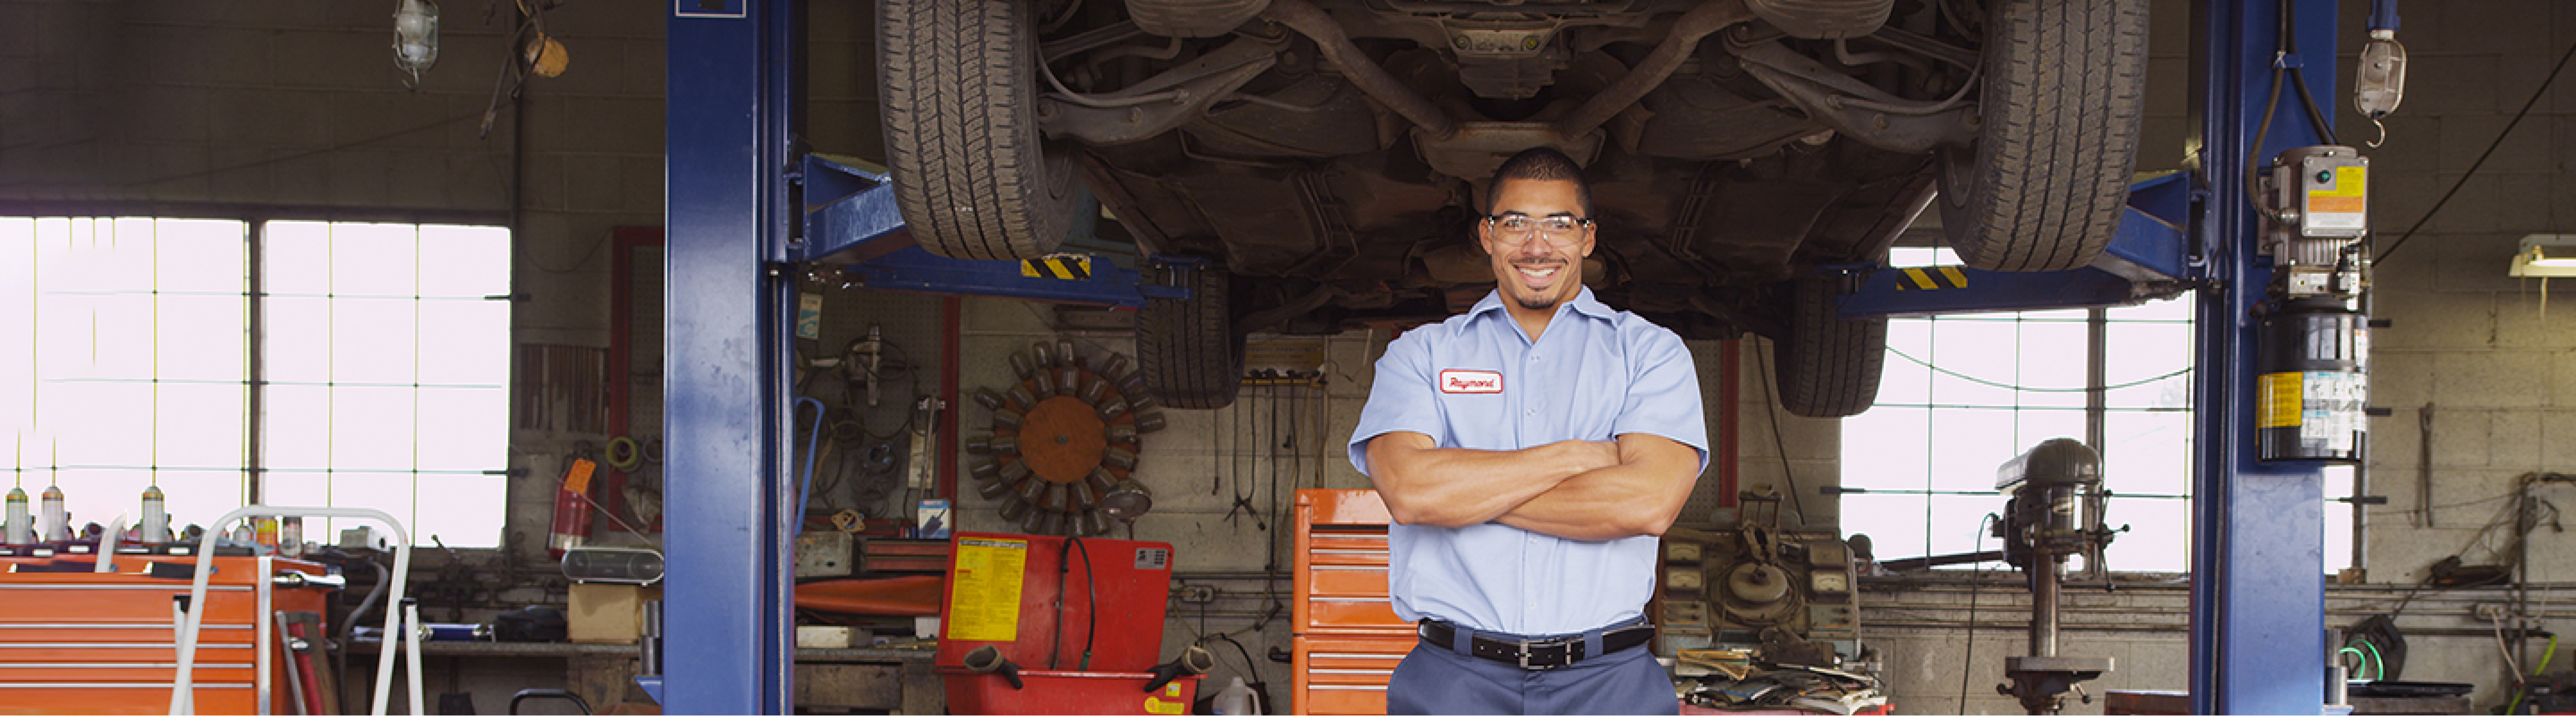 mechanic smiling with arms crossed